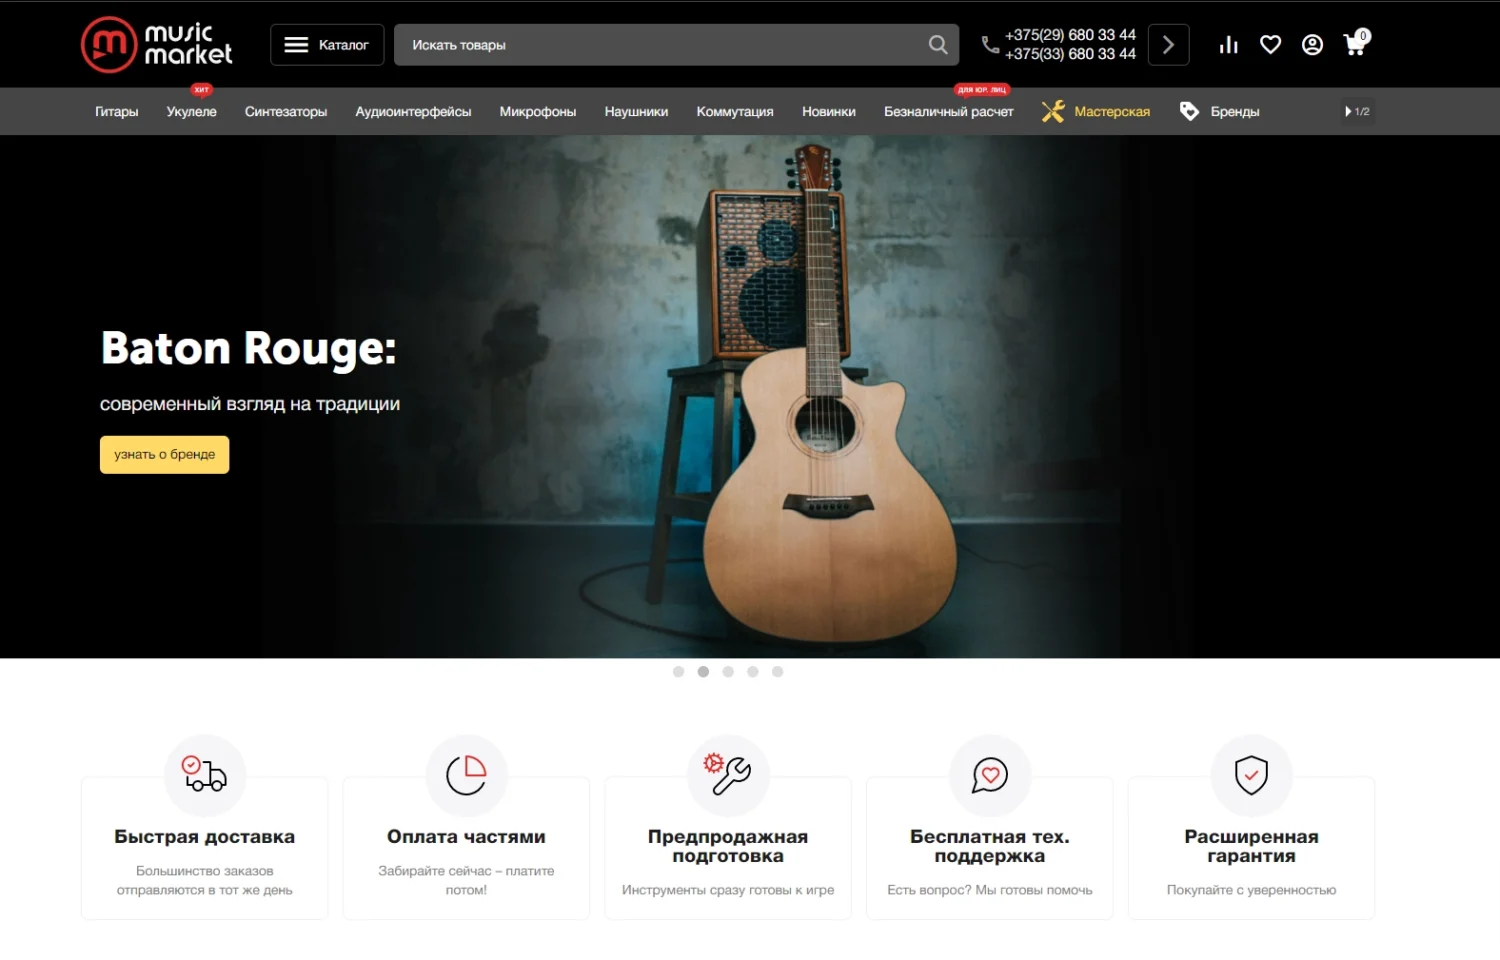 Online store of musical instruments